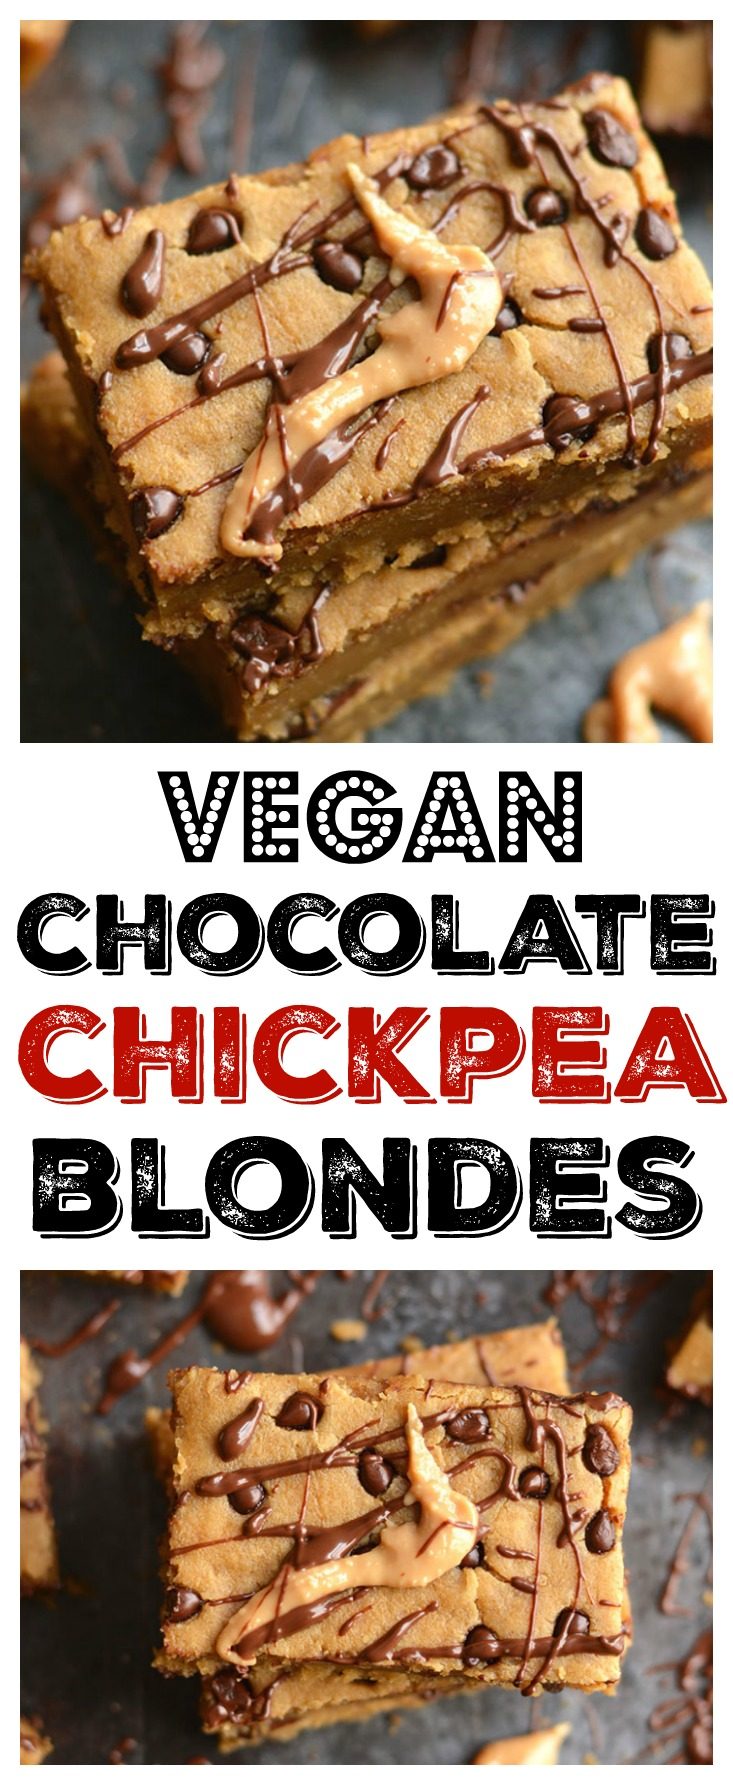 Vegan Chocolate Chip Chickpea Blondies! Sink your teeth into these good for you, decadent, gooey, protein packed, chocolatey treats. Vegan + Gluten Free + Low Calorie